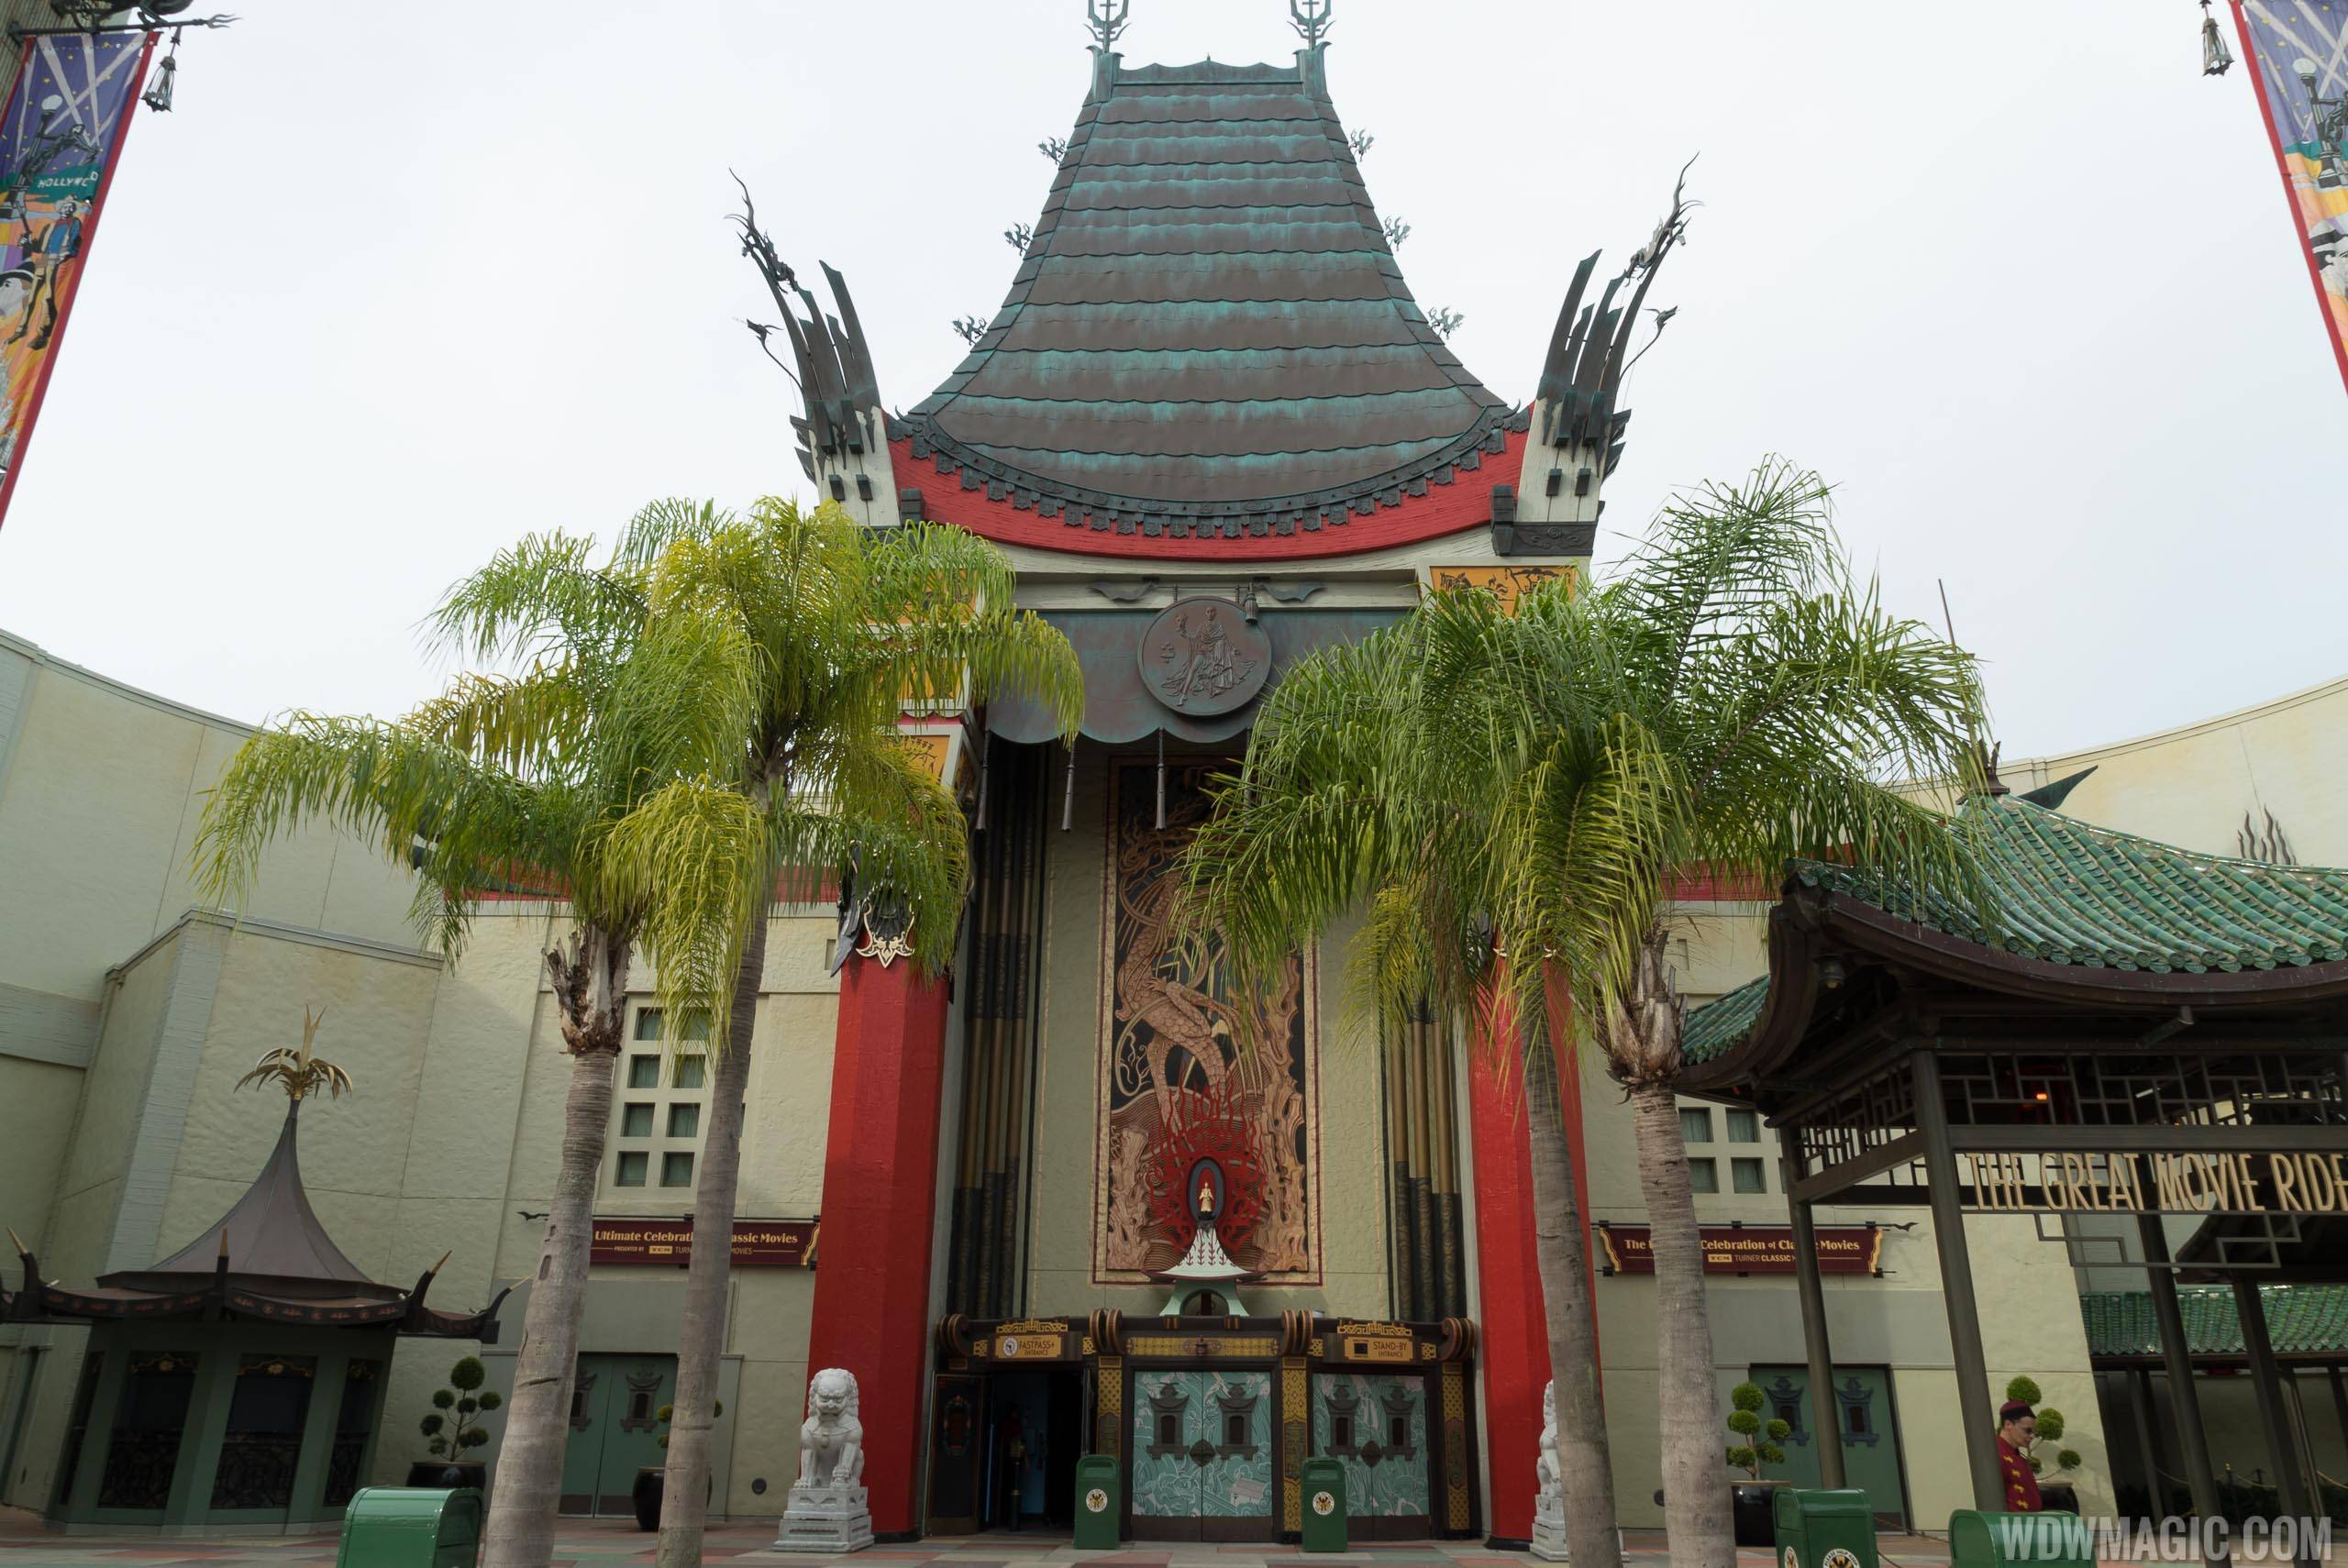 PHOTOS - Refurbishment work continues on The Great Movie Ride's exterior